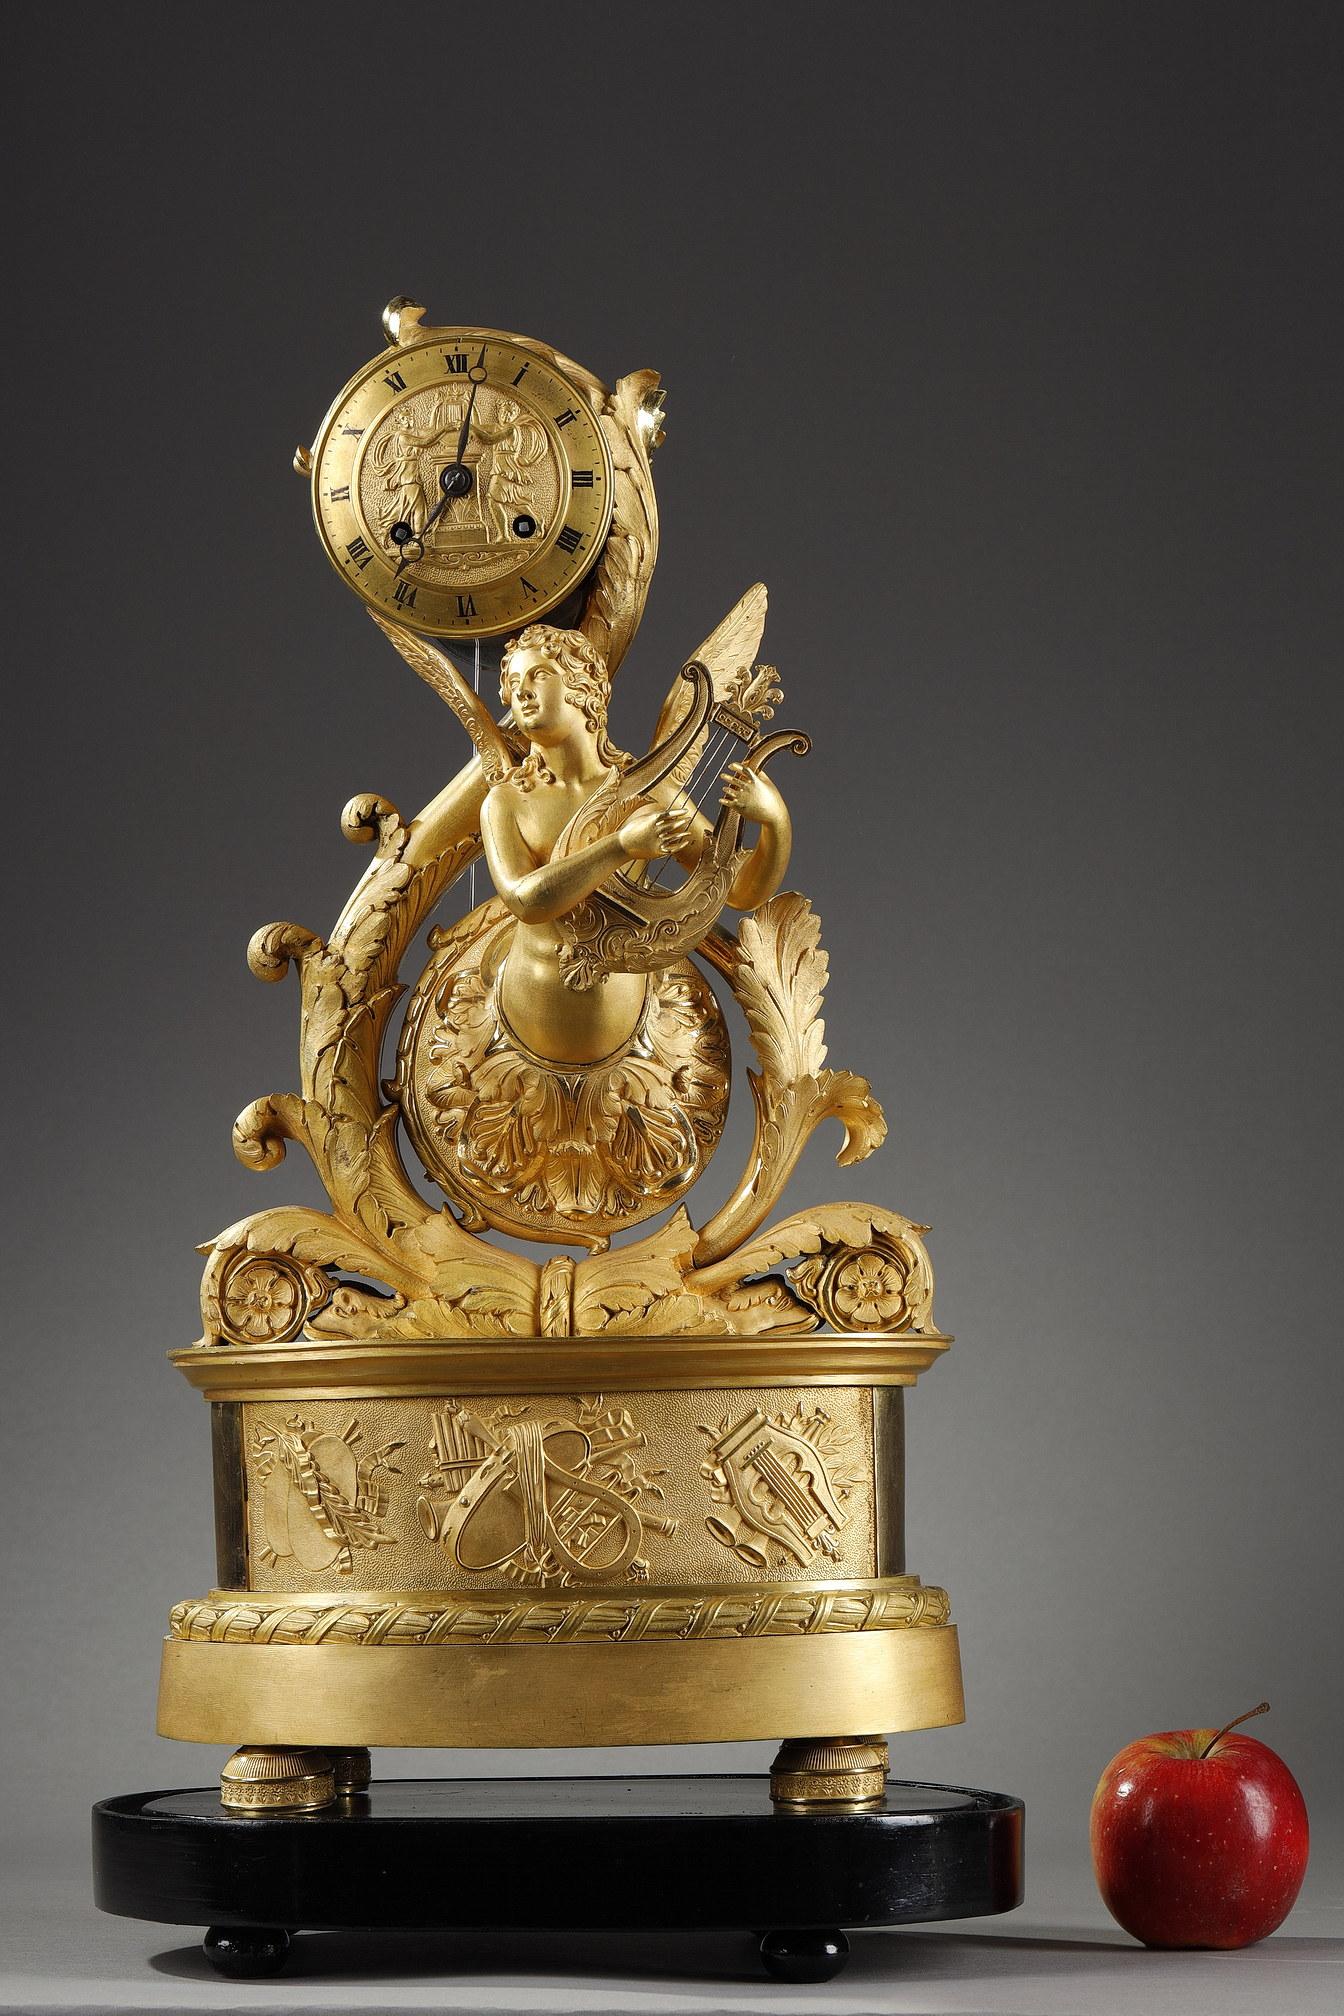 A Charles X period ormolu clock representing a winged genie playing the lyre in acanthus leaves populated by dolphins. The dial, decorated with two nymphs carrying a lyre on an altar, indicates the hours in black Roman numerals. The oval base is